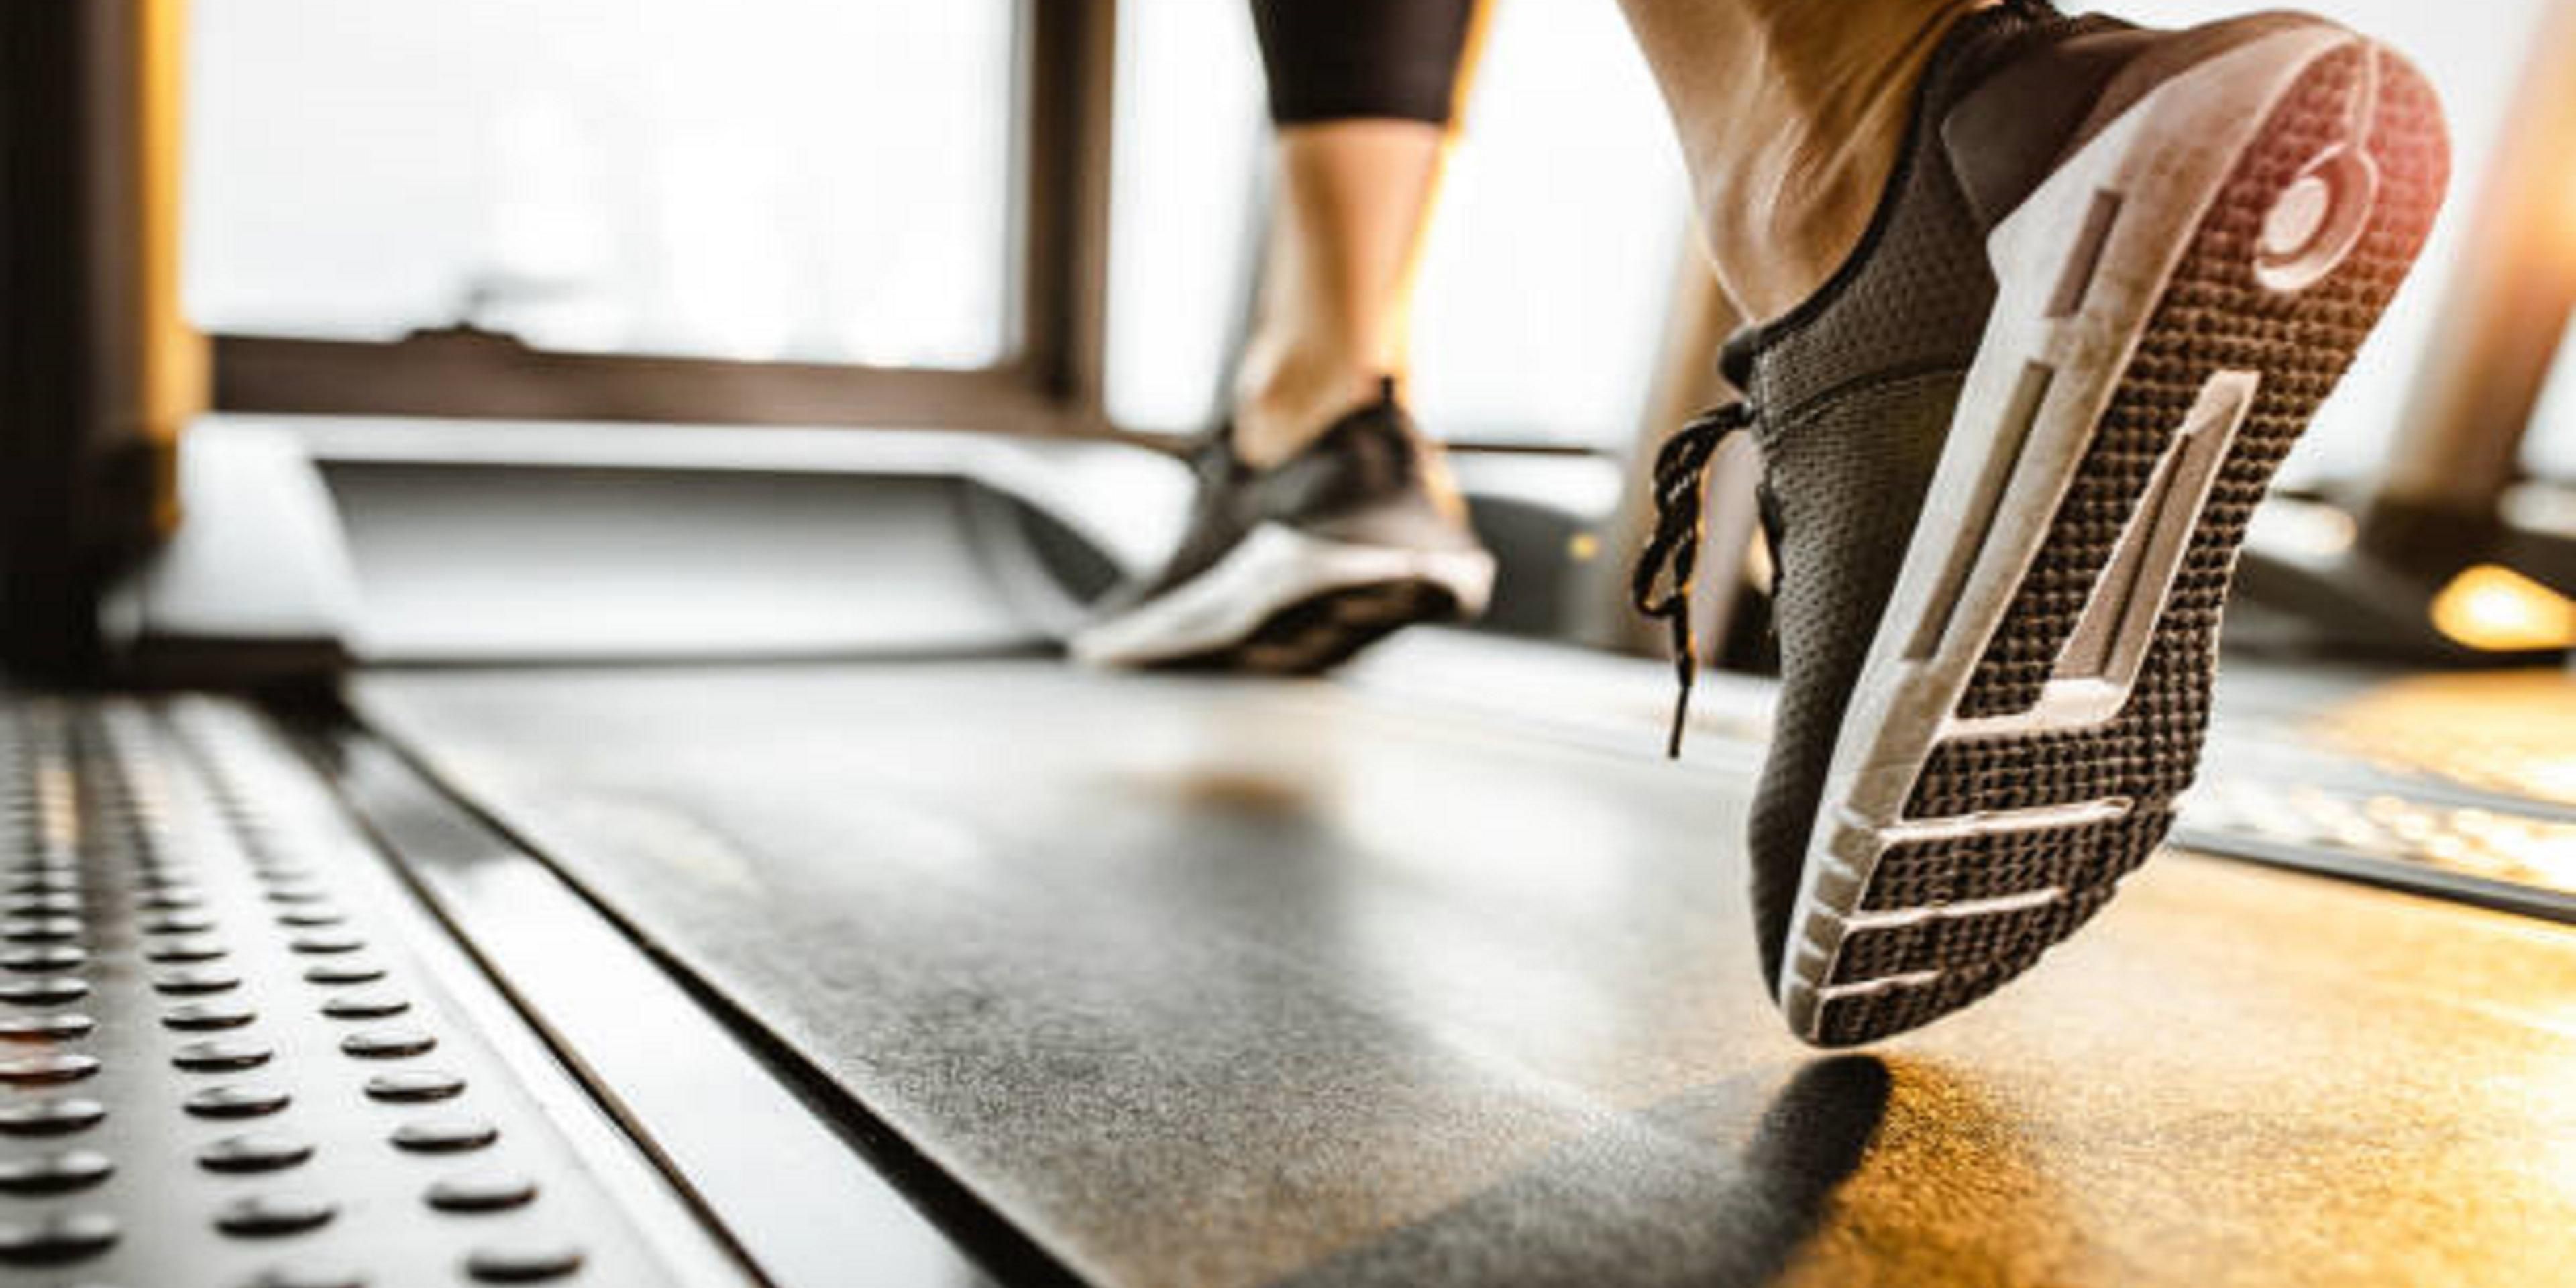 Get your sweat on in our complimentary, fully equipped Fitness Center open from 5:00 AM to 11:00 PM.